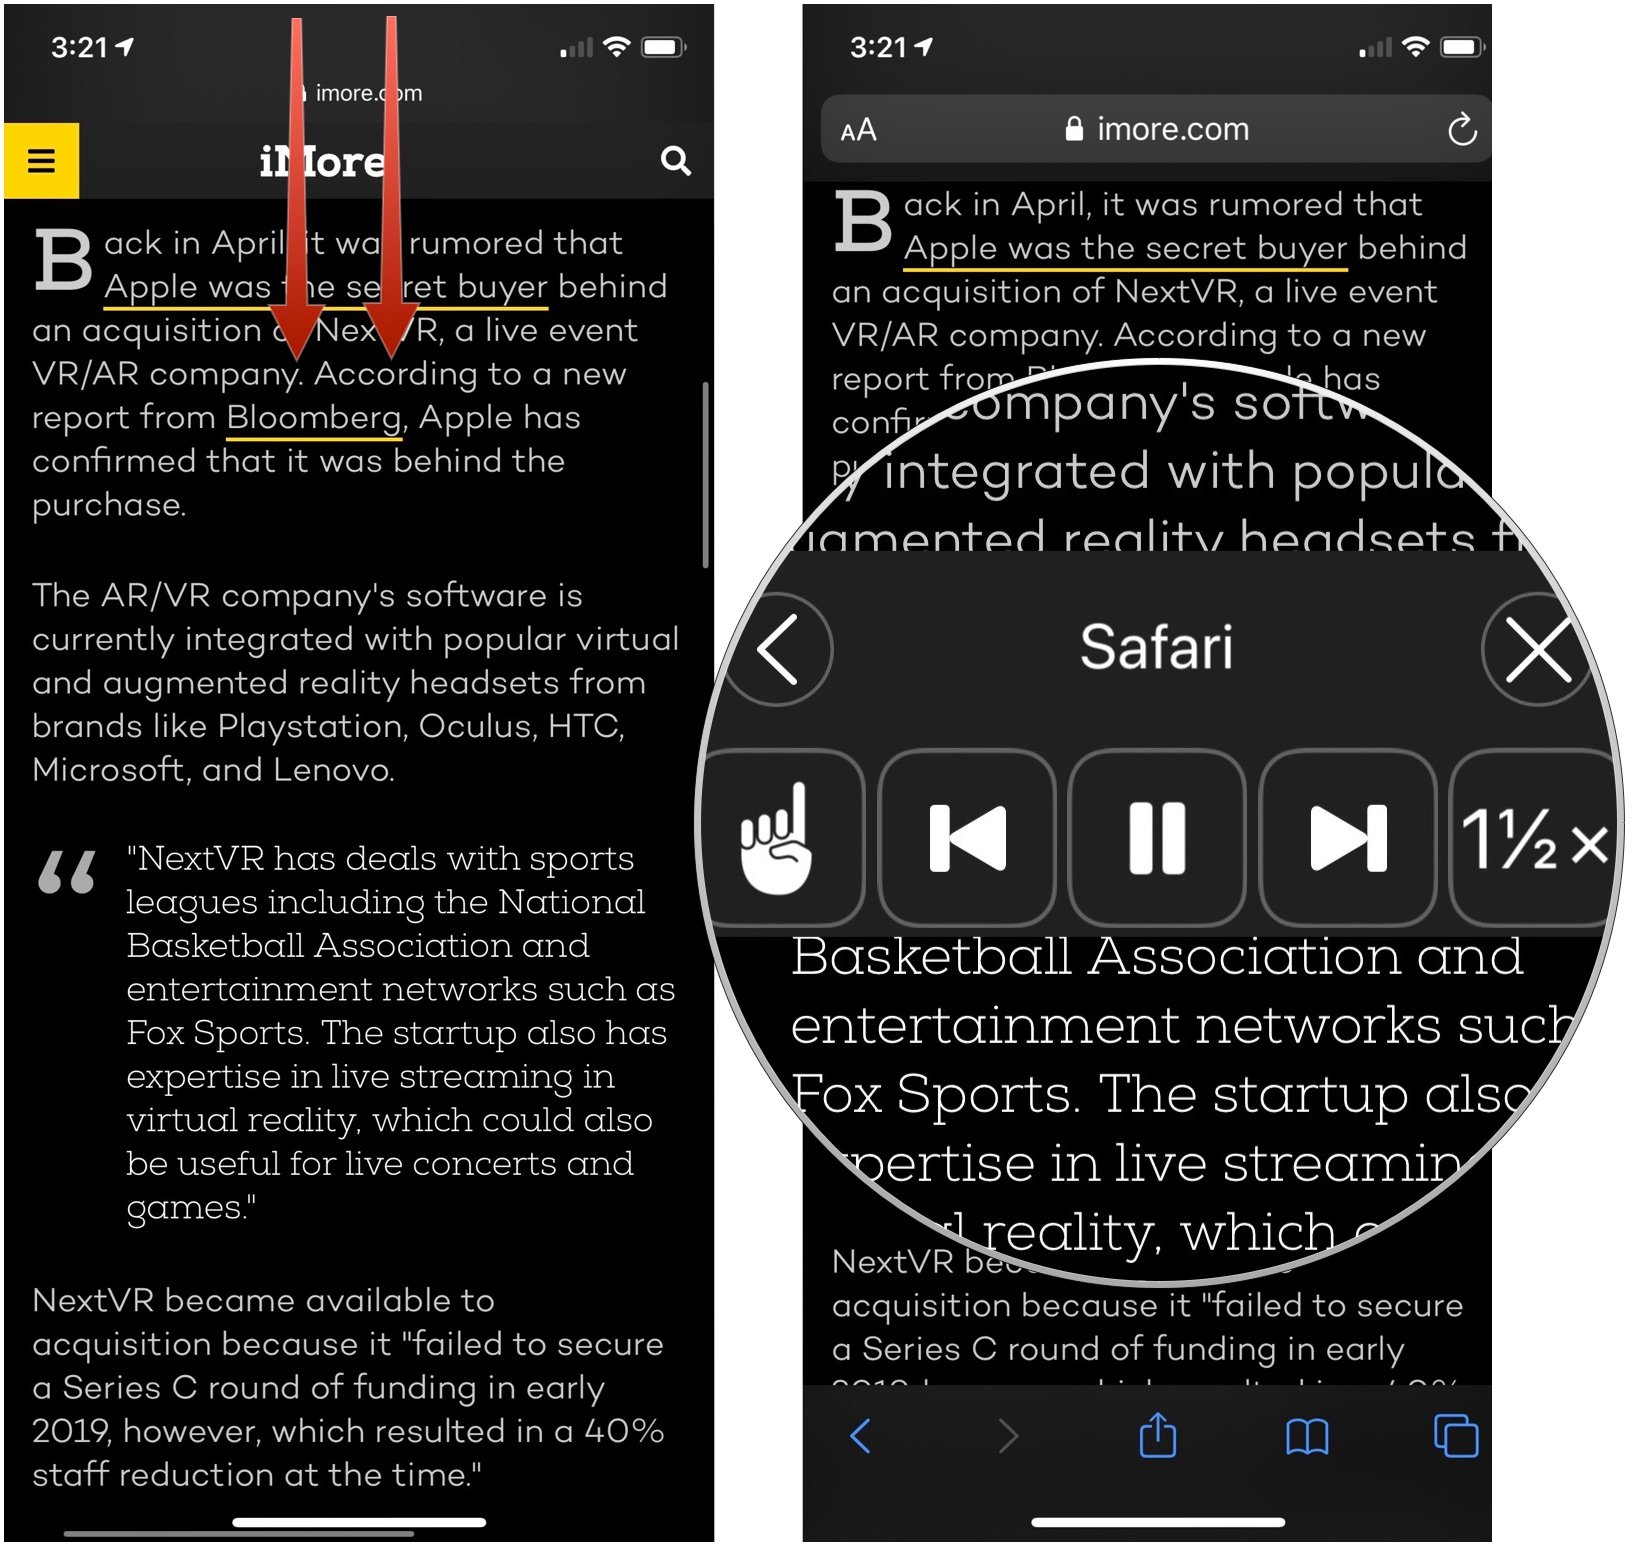 Use Speak Screen, showing how to swipe down with two fingers from the top of the screen, then use the playback controls